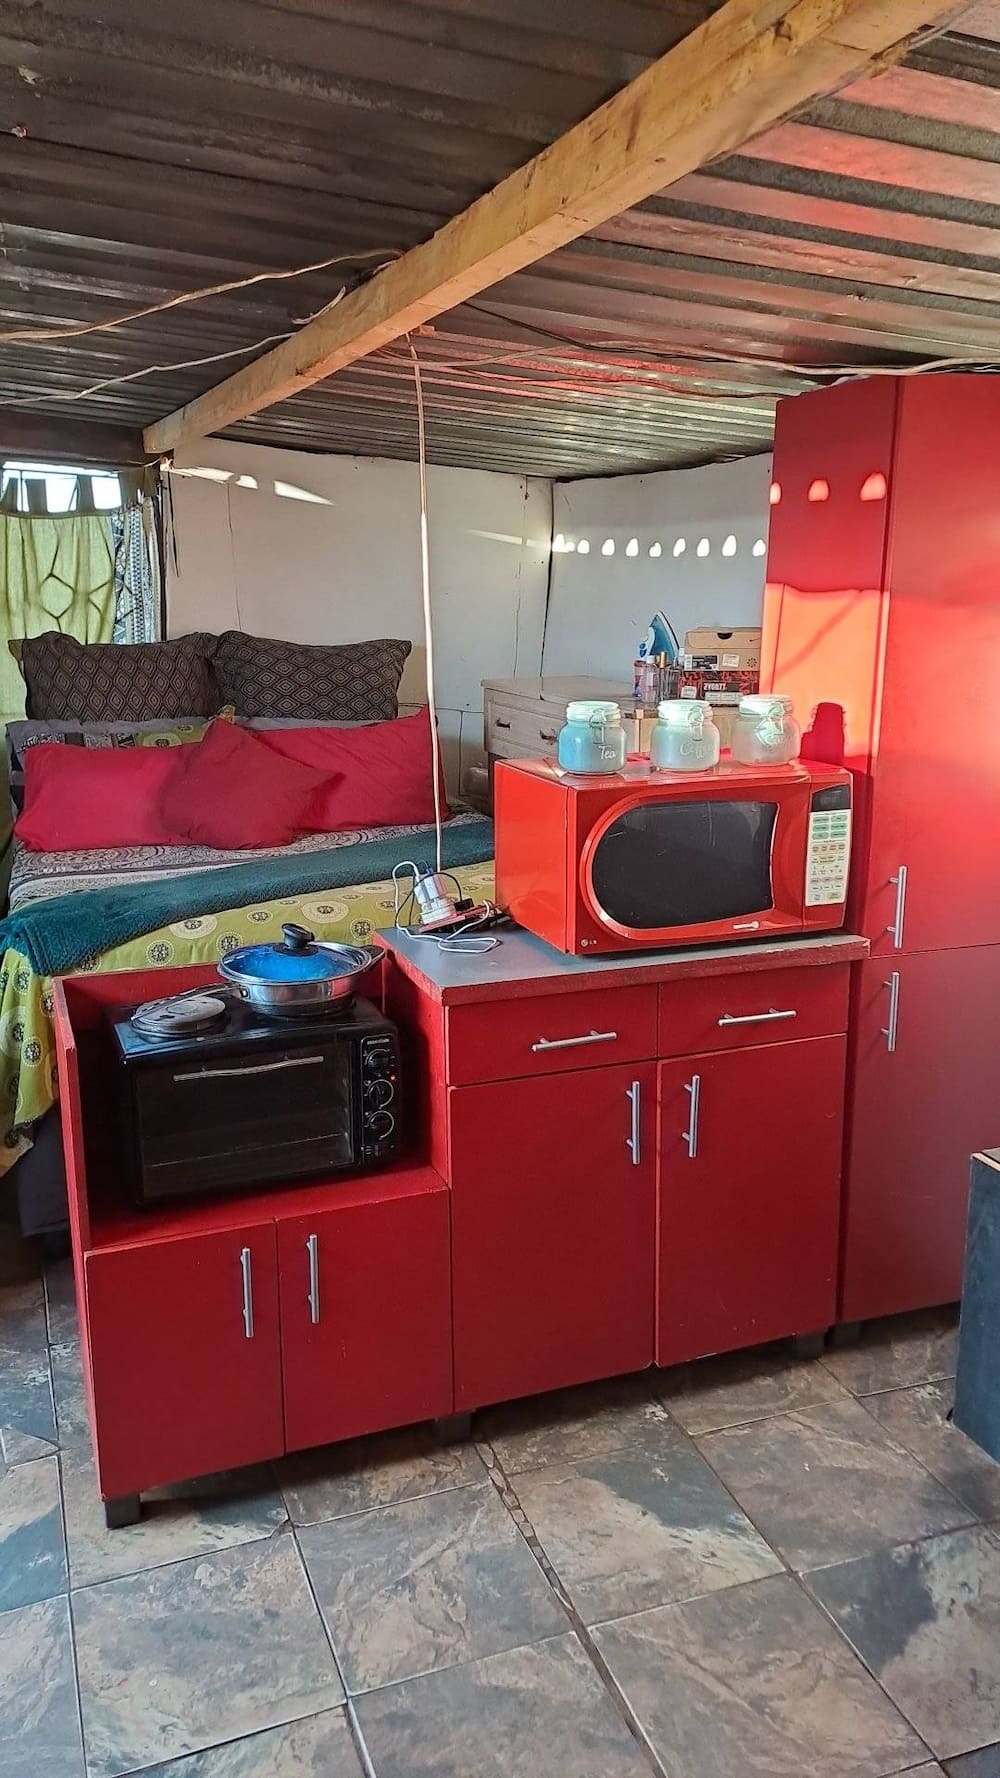 Woman shares photos of her kitchen and bedroom.